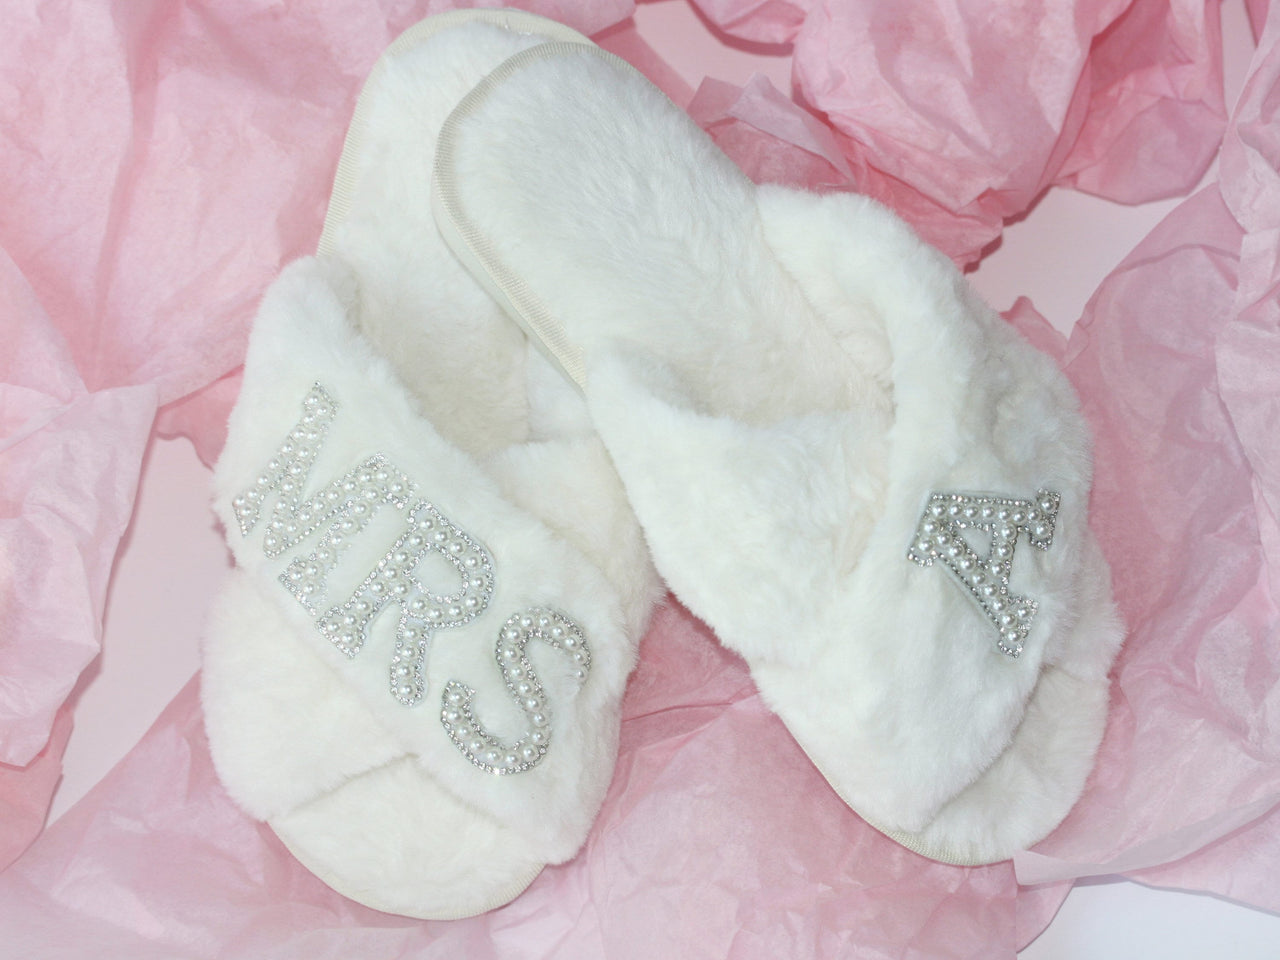 Bride Slippers, Bridesmaid slippers, Bridal slippers, custom slippers, fluffy slippers with Pearl patch, Wedding set, bridesmaid gifts